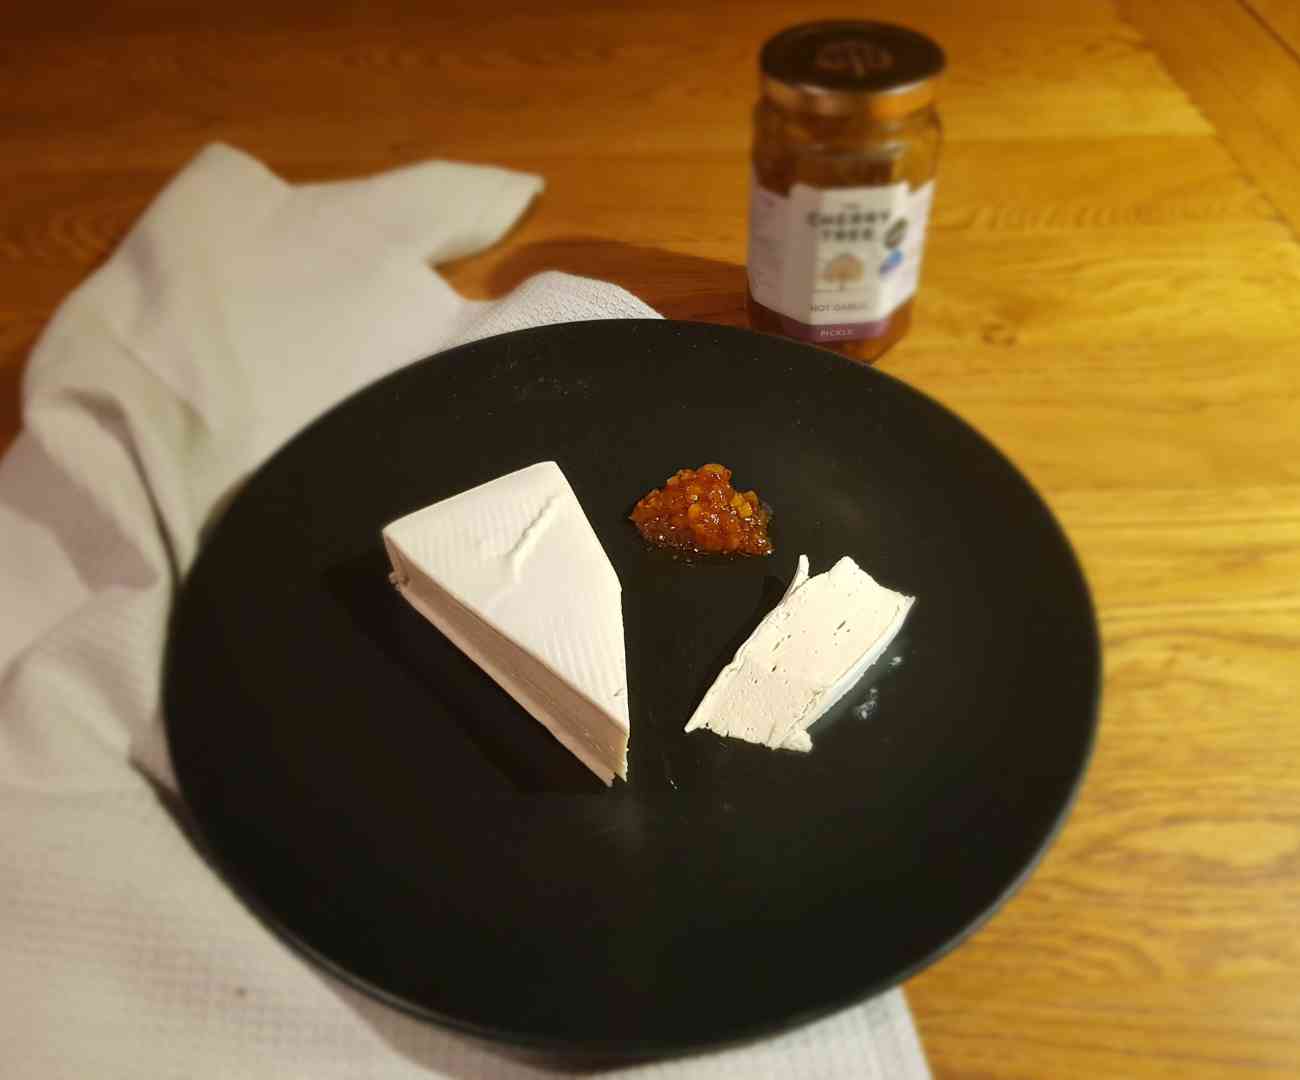 To illustrate this vegans and cholesterol article, this is an image of a black plate on a wooden table, with a wedge of vegan cheese, a thin slice next to it, and a small pile of brown-coloured pickle. The vegan cheese resembles a wedge of dairy brie. Behind the plate on the table is an indistinguishable glass jar with a white label on the front containing the pickle.